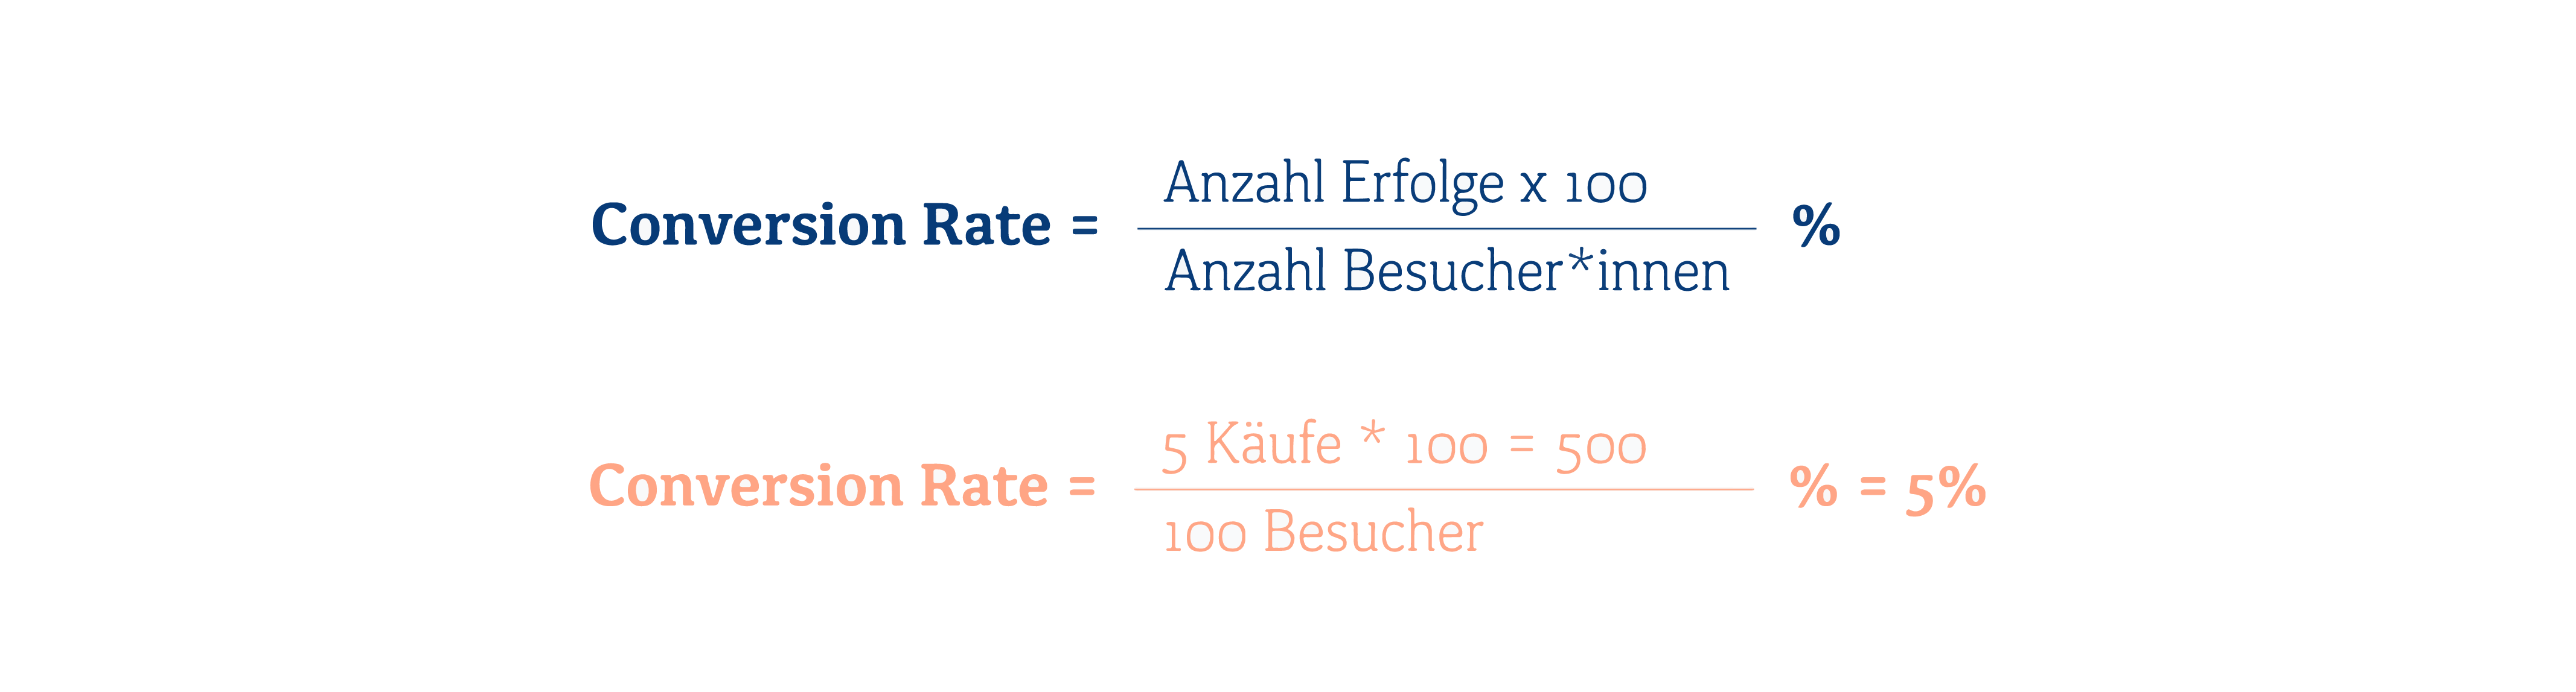 Conversion Rate Formel 